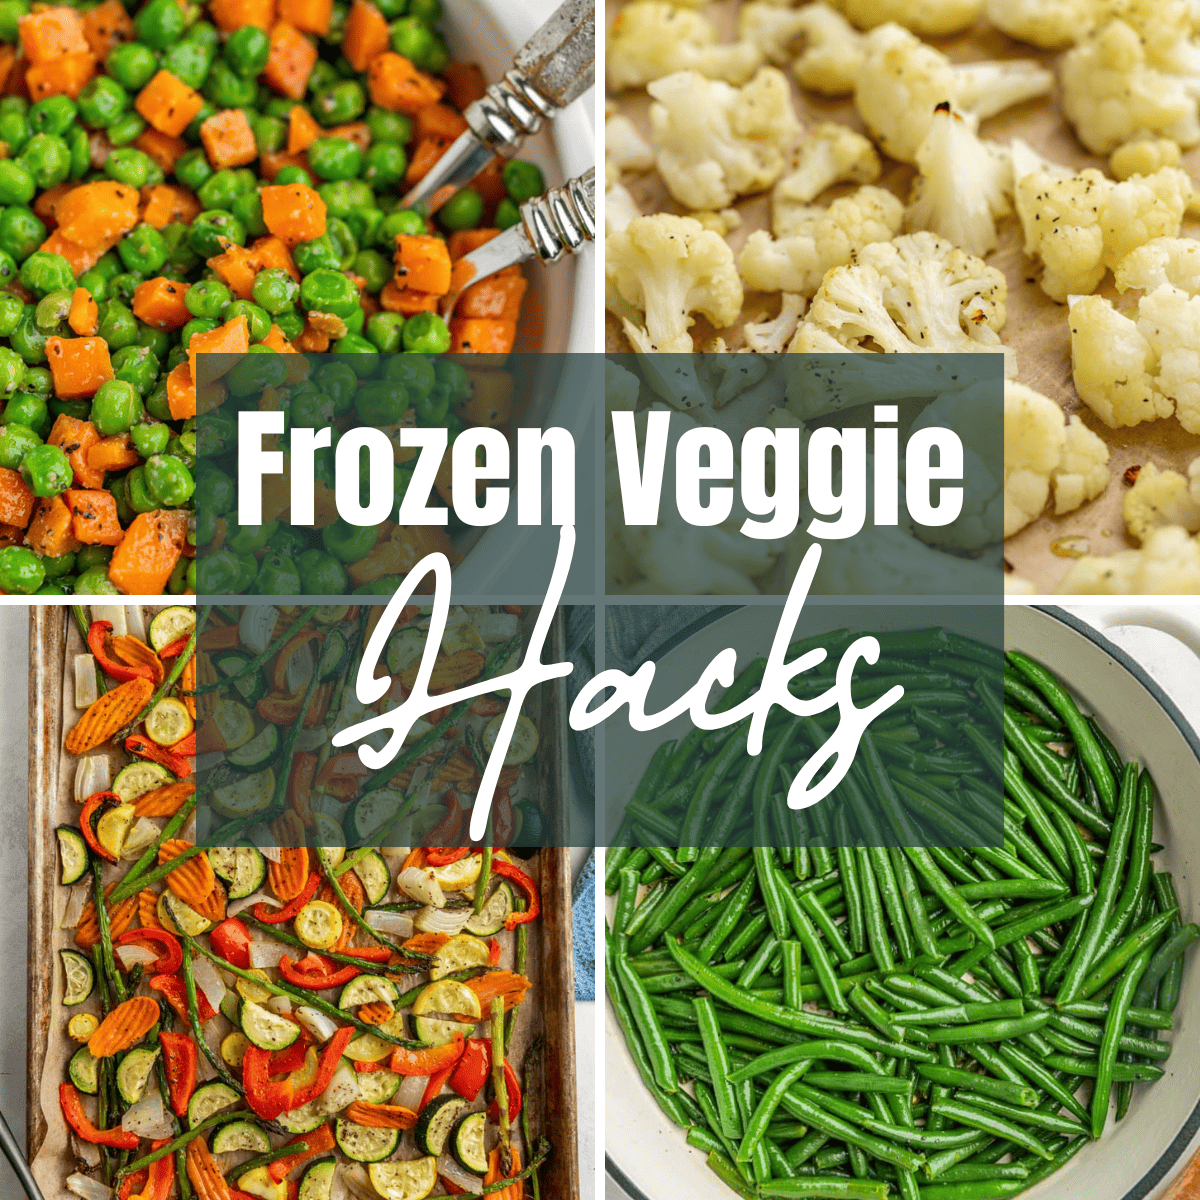 Decorative collage image of frozen veggies with a title overlay that says "Frozen Veggie Hacks."